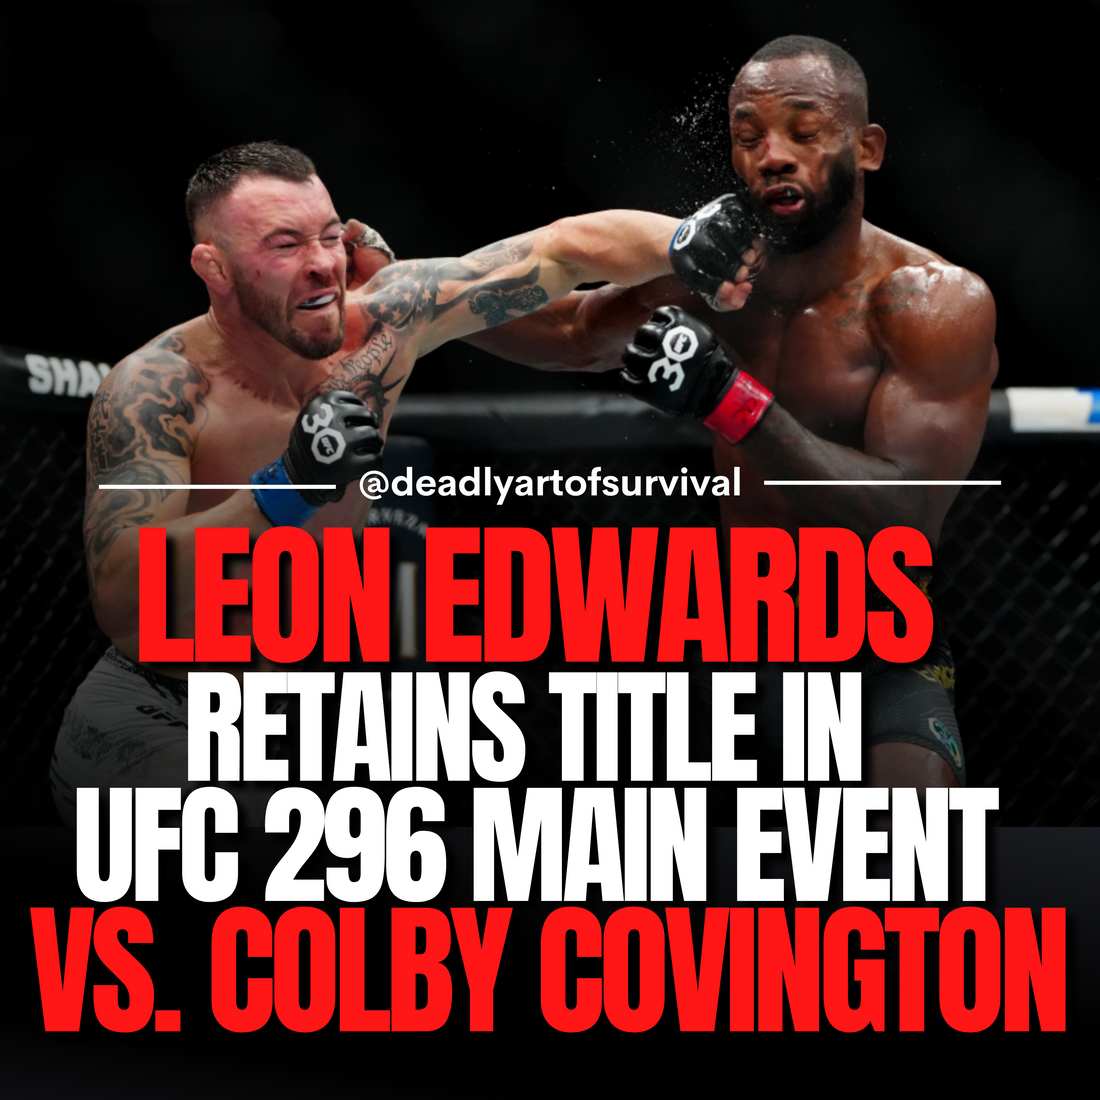 Leon Edwards Holds Firm in UFC 296 Title Defense, Main Event with Colby Covington Fails to Impress